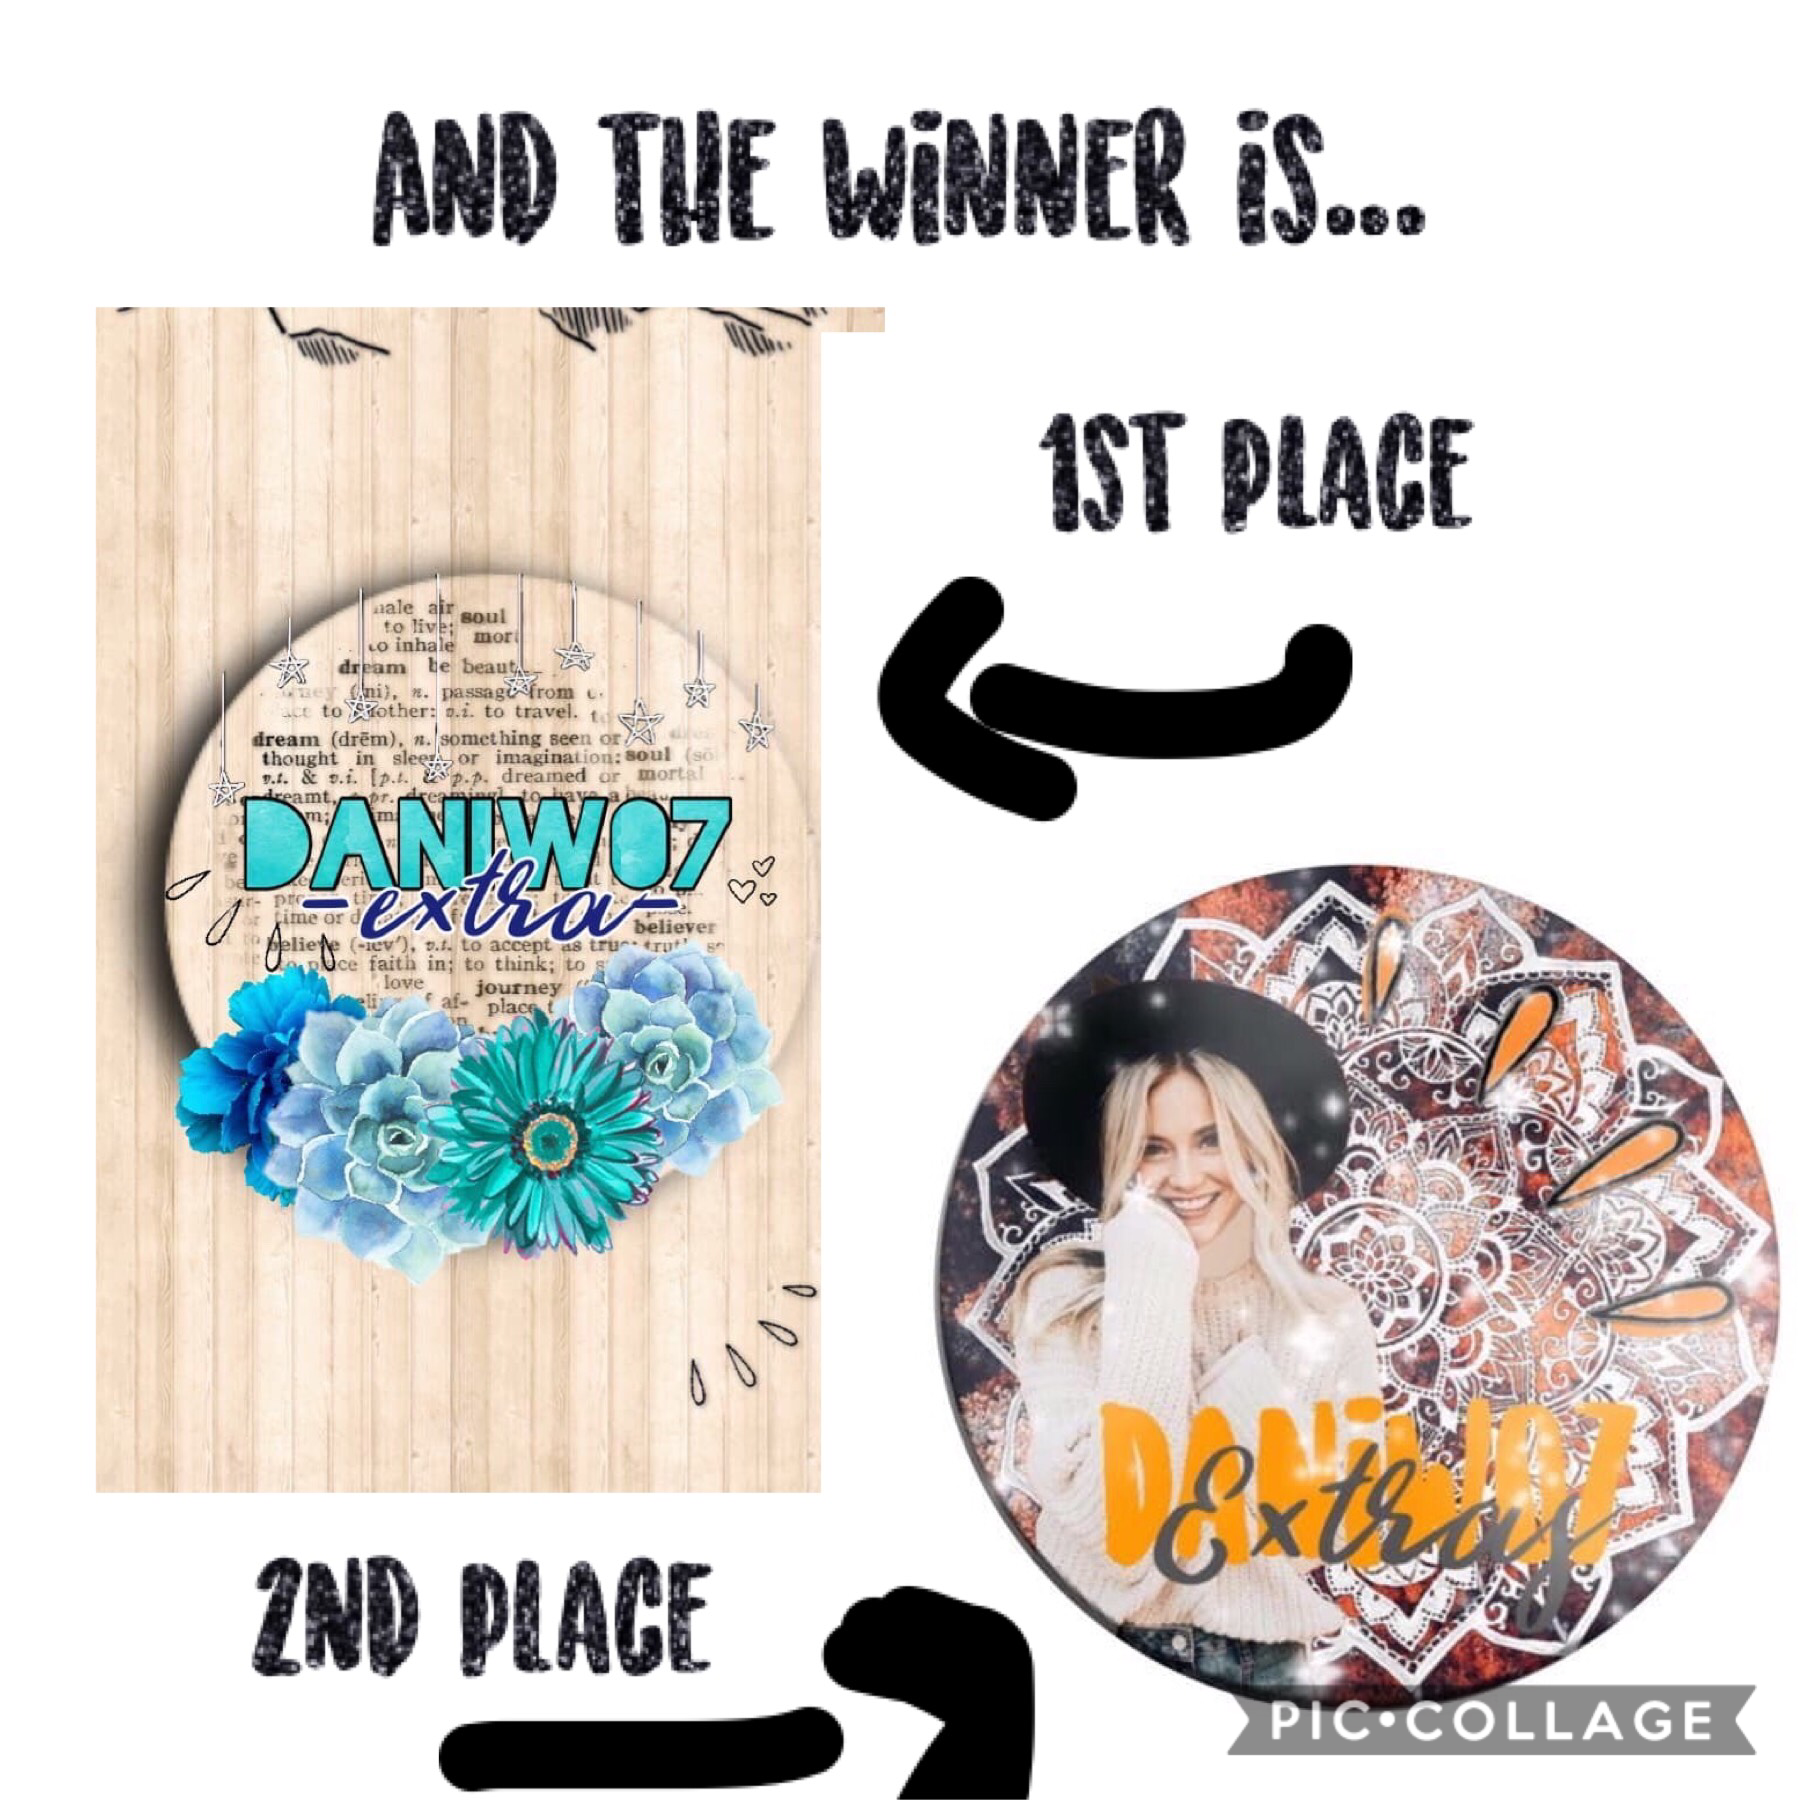 And the winner is...
thank you for entering!! And congratulations to the winners!!🥰